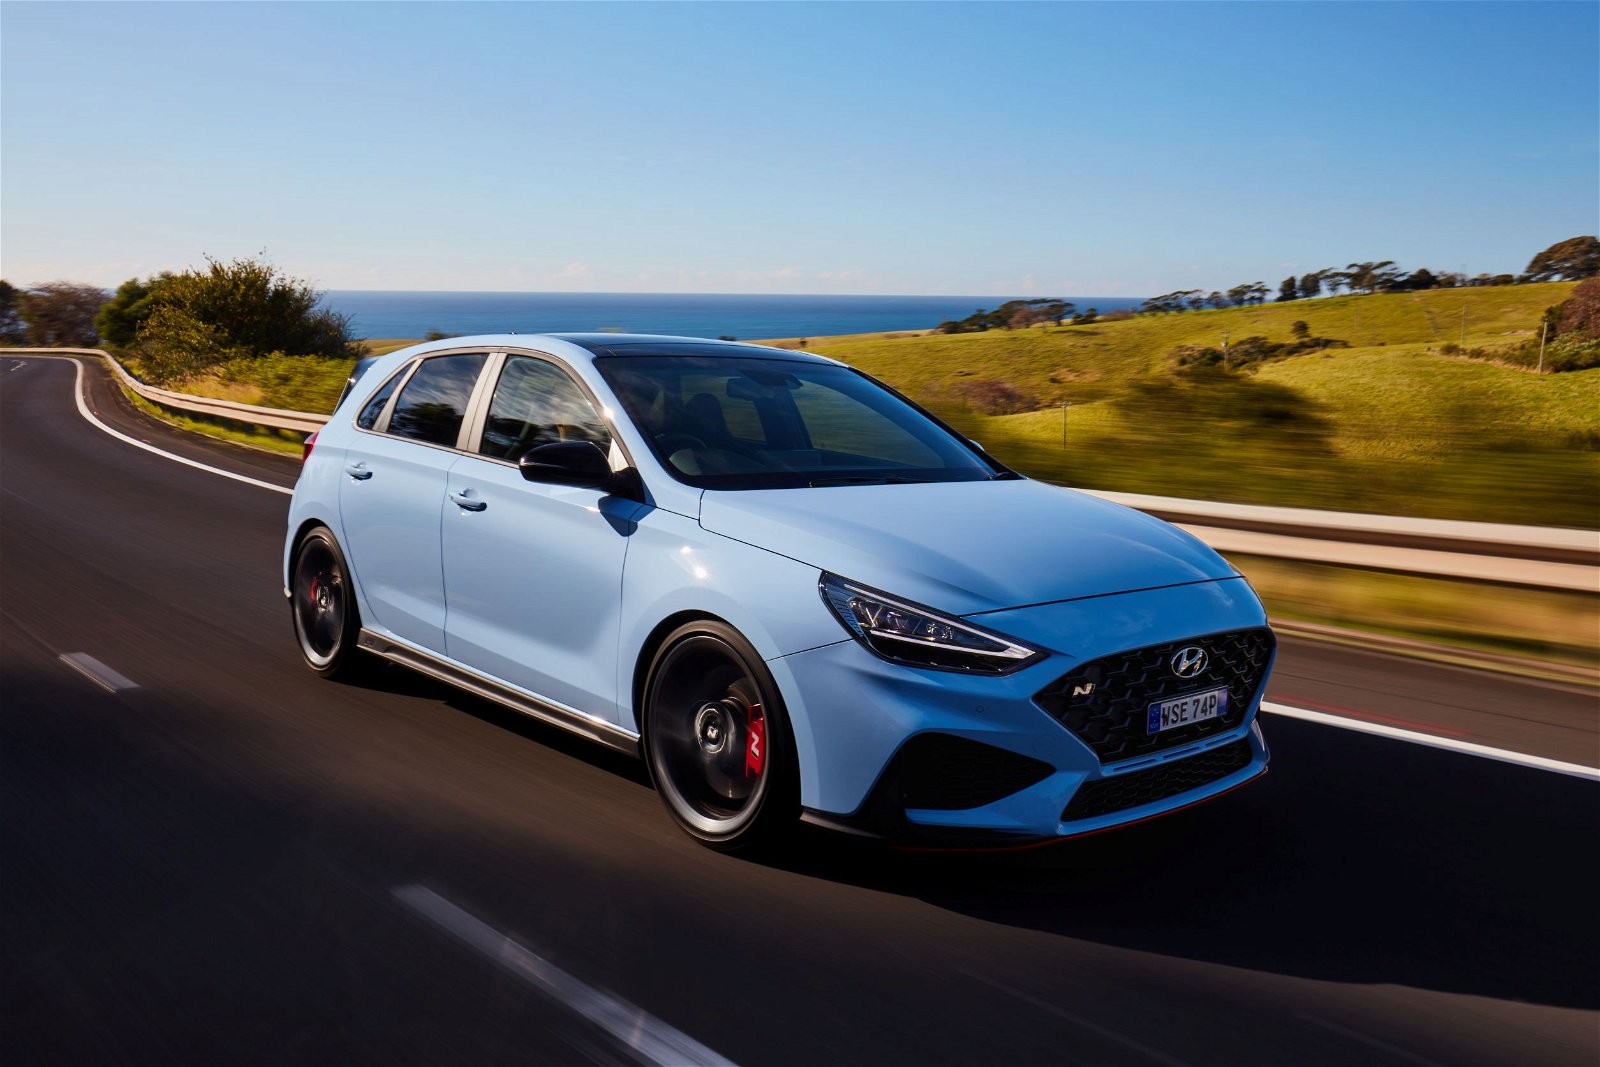 2021 Hyundai i30 N Debuts With Sharper Exterior And Eight-Speed DCT